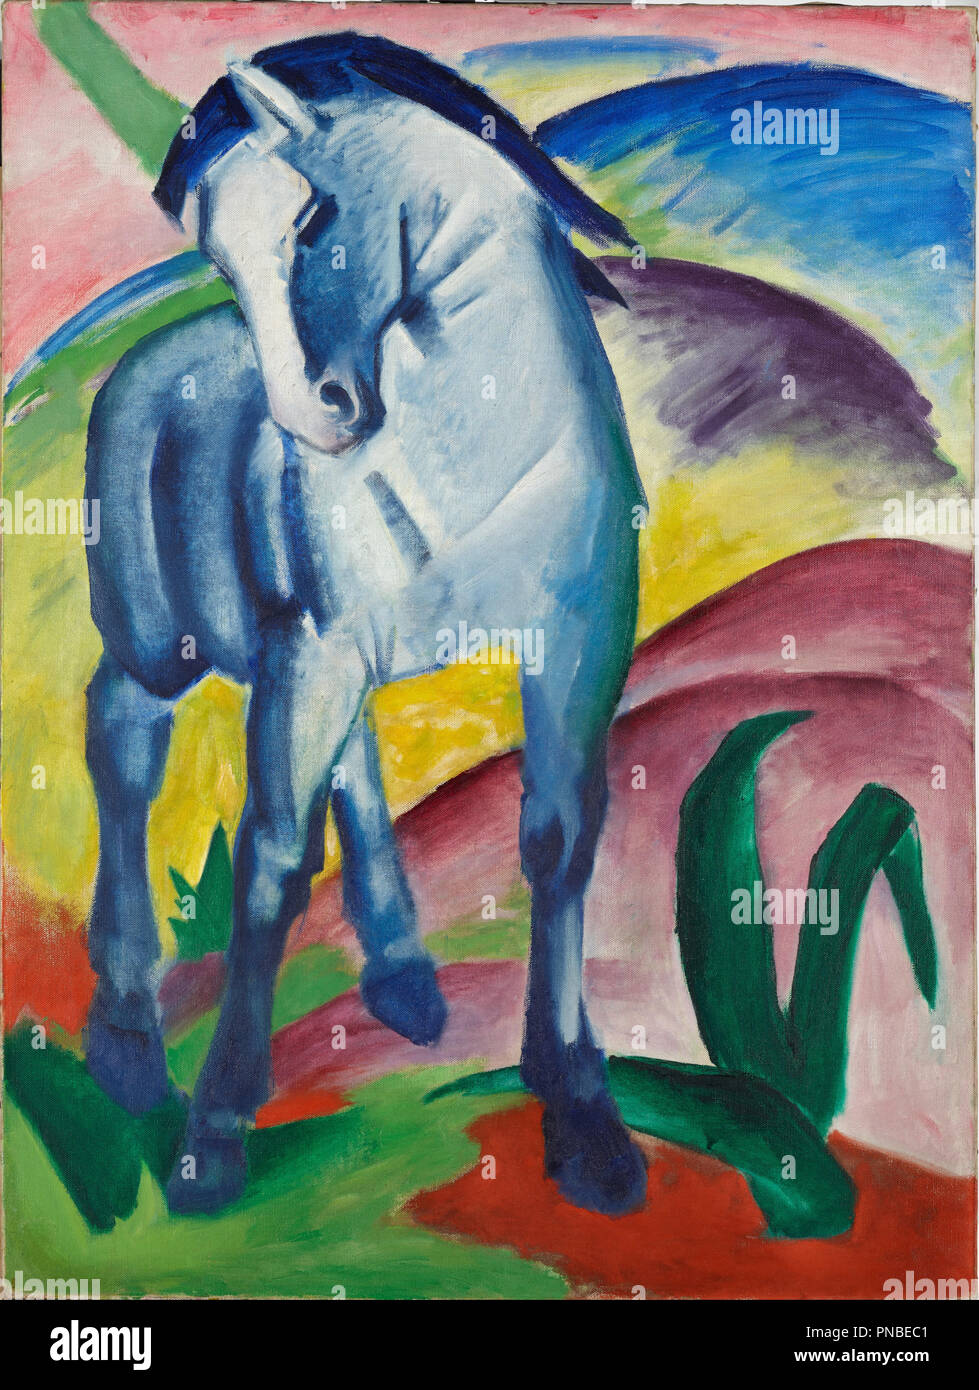 Blaues Pferd I. Date/Period: 1911. Painting. Oil on canvas. Height: 112 cm (44 in); Width: 84.5 cm (33.2 in). Author: FRANZ MARC. MARC, FRANZ. Stock Photo